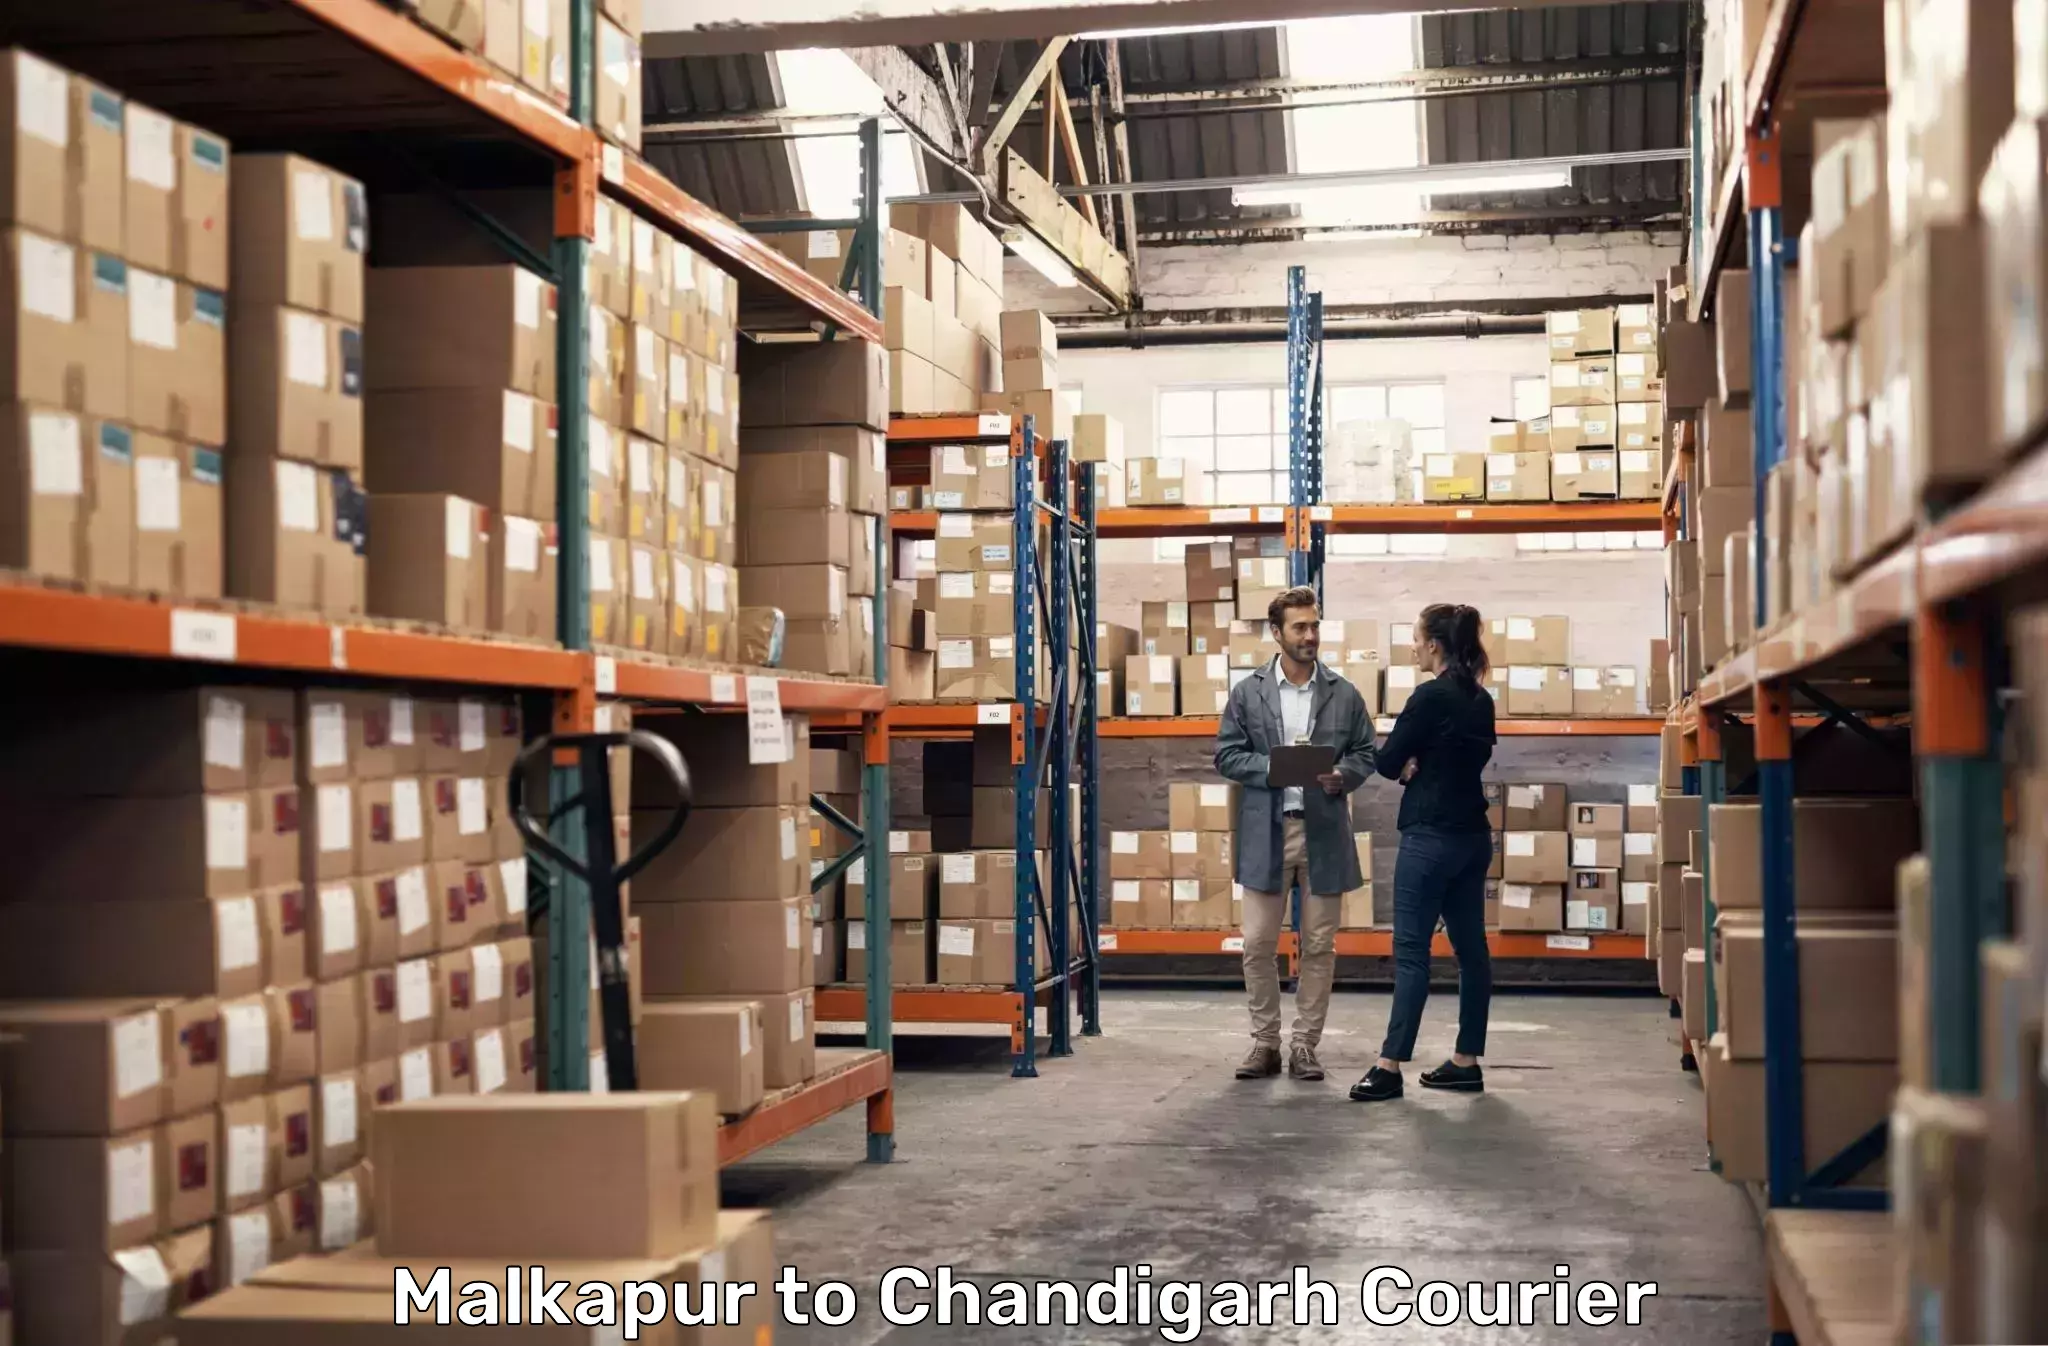 Courier service efficiency Malkapur to Chandigarh